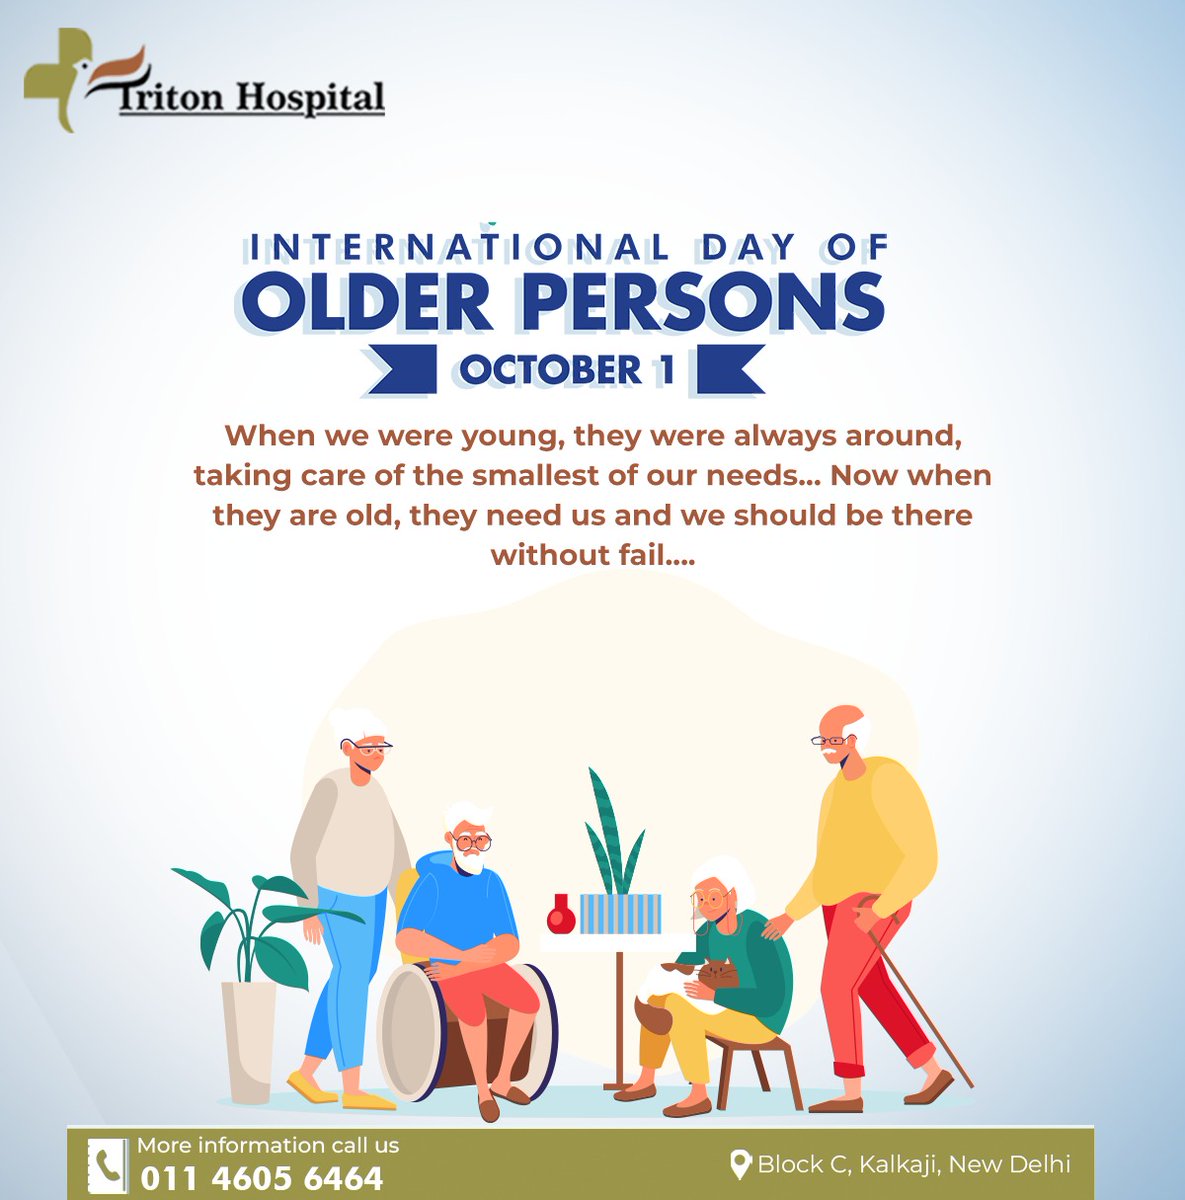 You are so full of experience and you are so full of knowledge.Without you, our lives are incomplete.
.
Happy International Day of Older Persons.
.
.
#DayofOlderPersons #TritonHospital #BestHospitalinDelhi #HospitalInDelhi #MultispecialtyHospitalInDelhi #newlife...